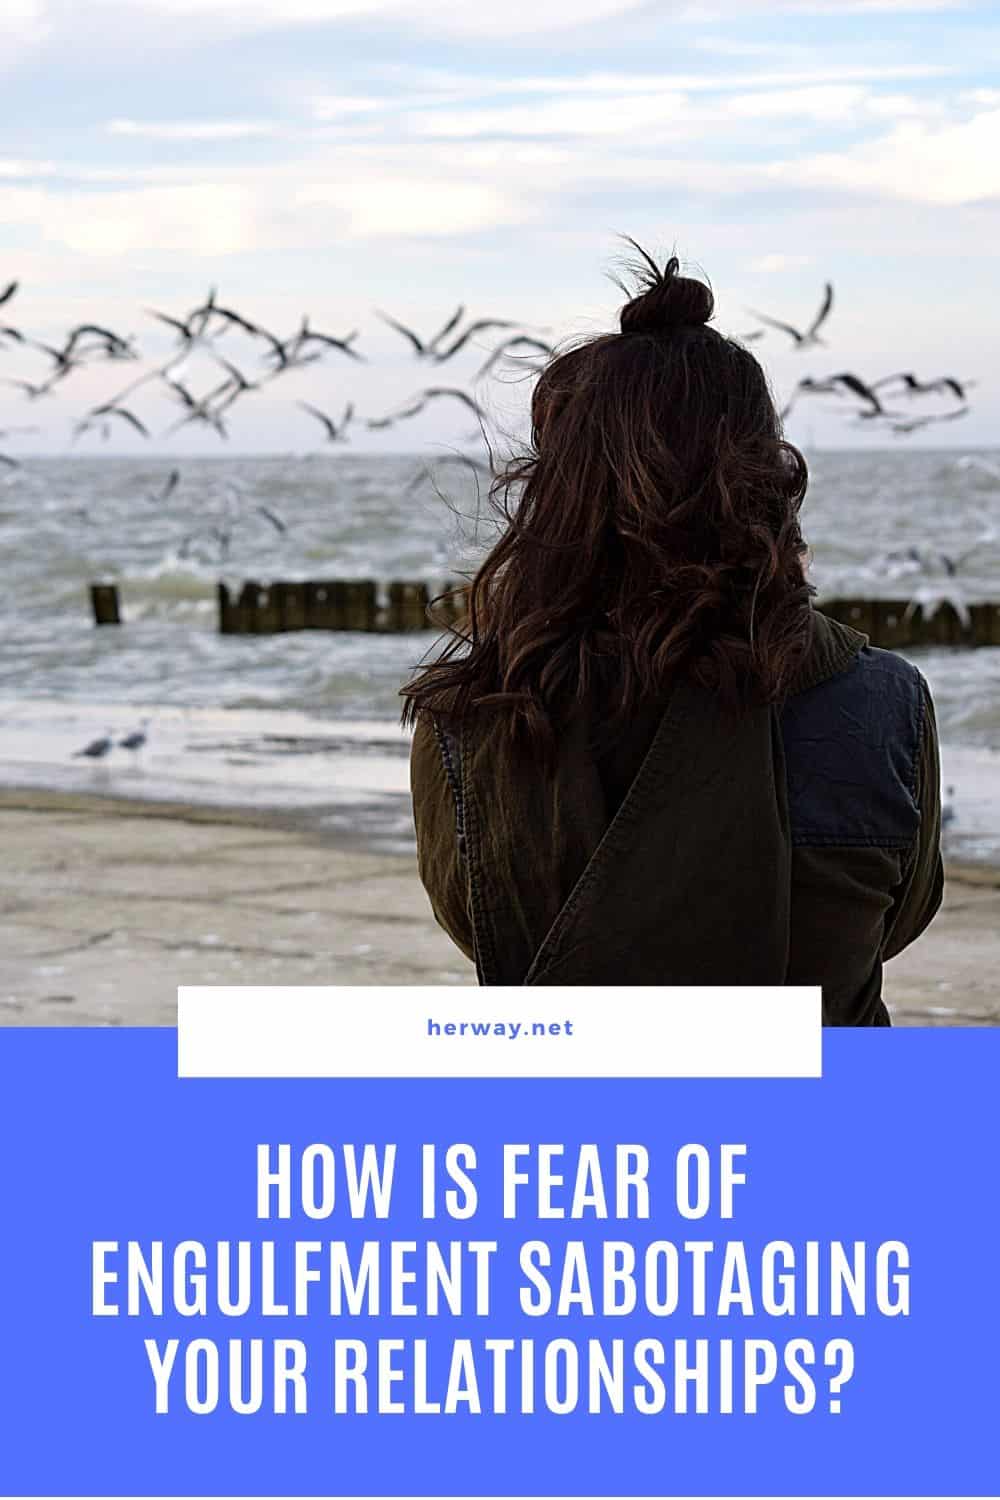 How Is Fear Of Engulfment Sabotaging Your Relationships?